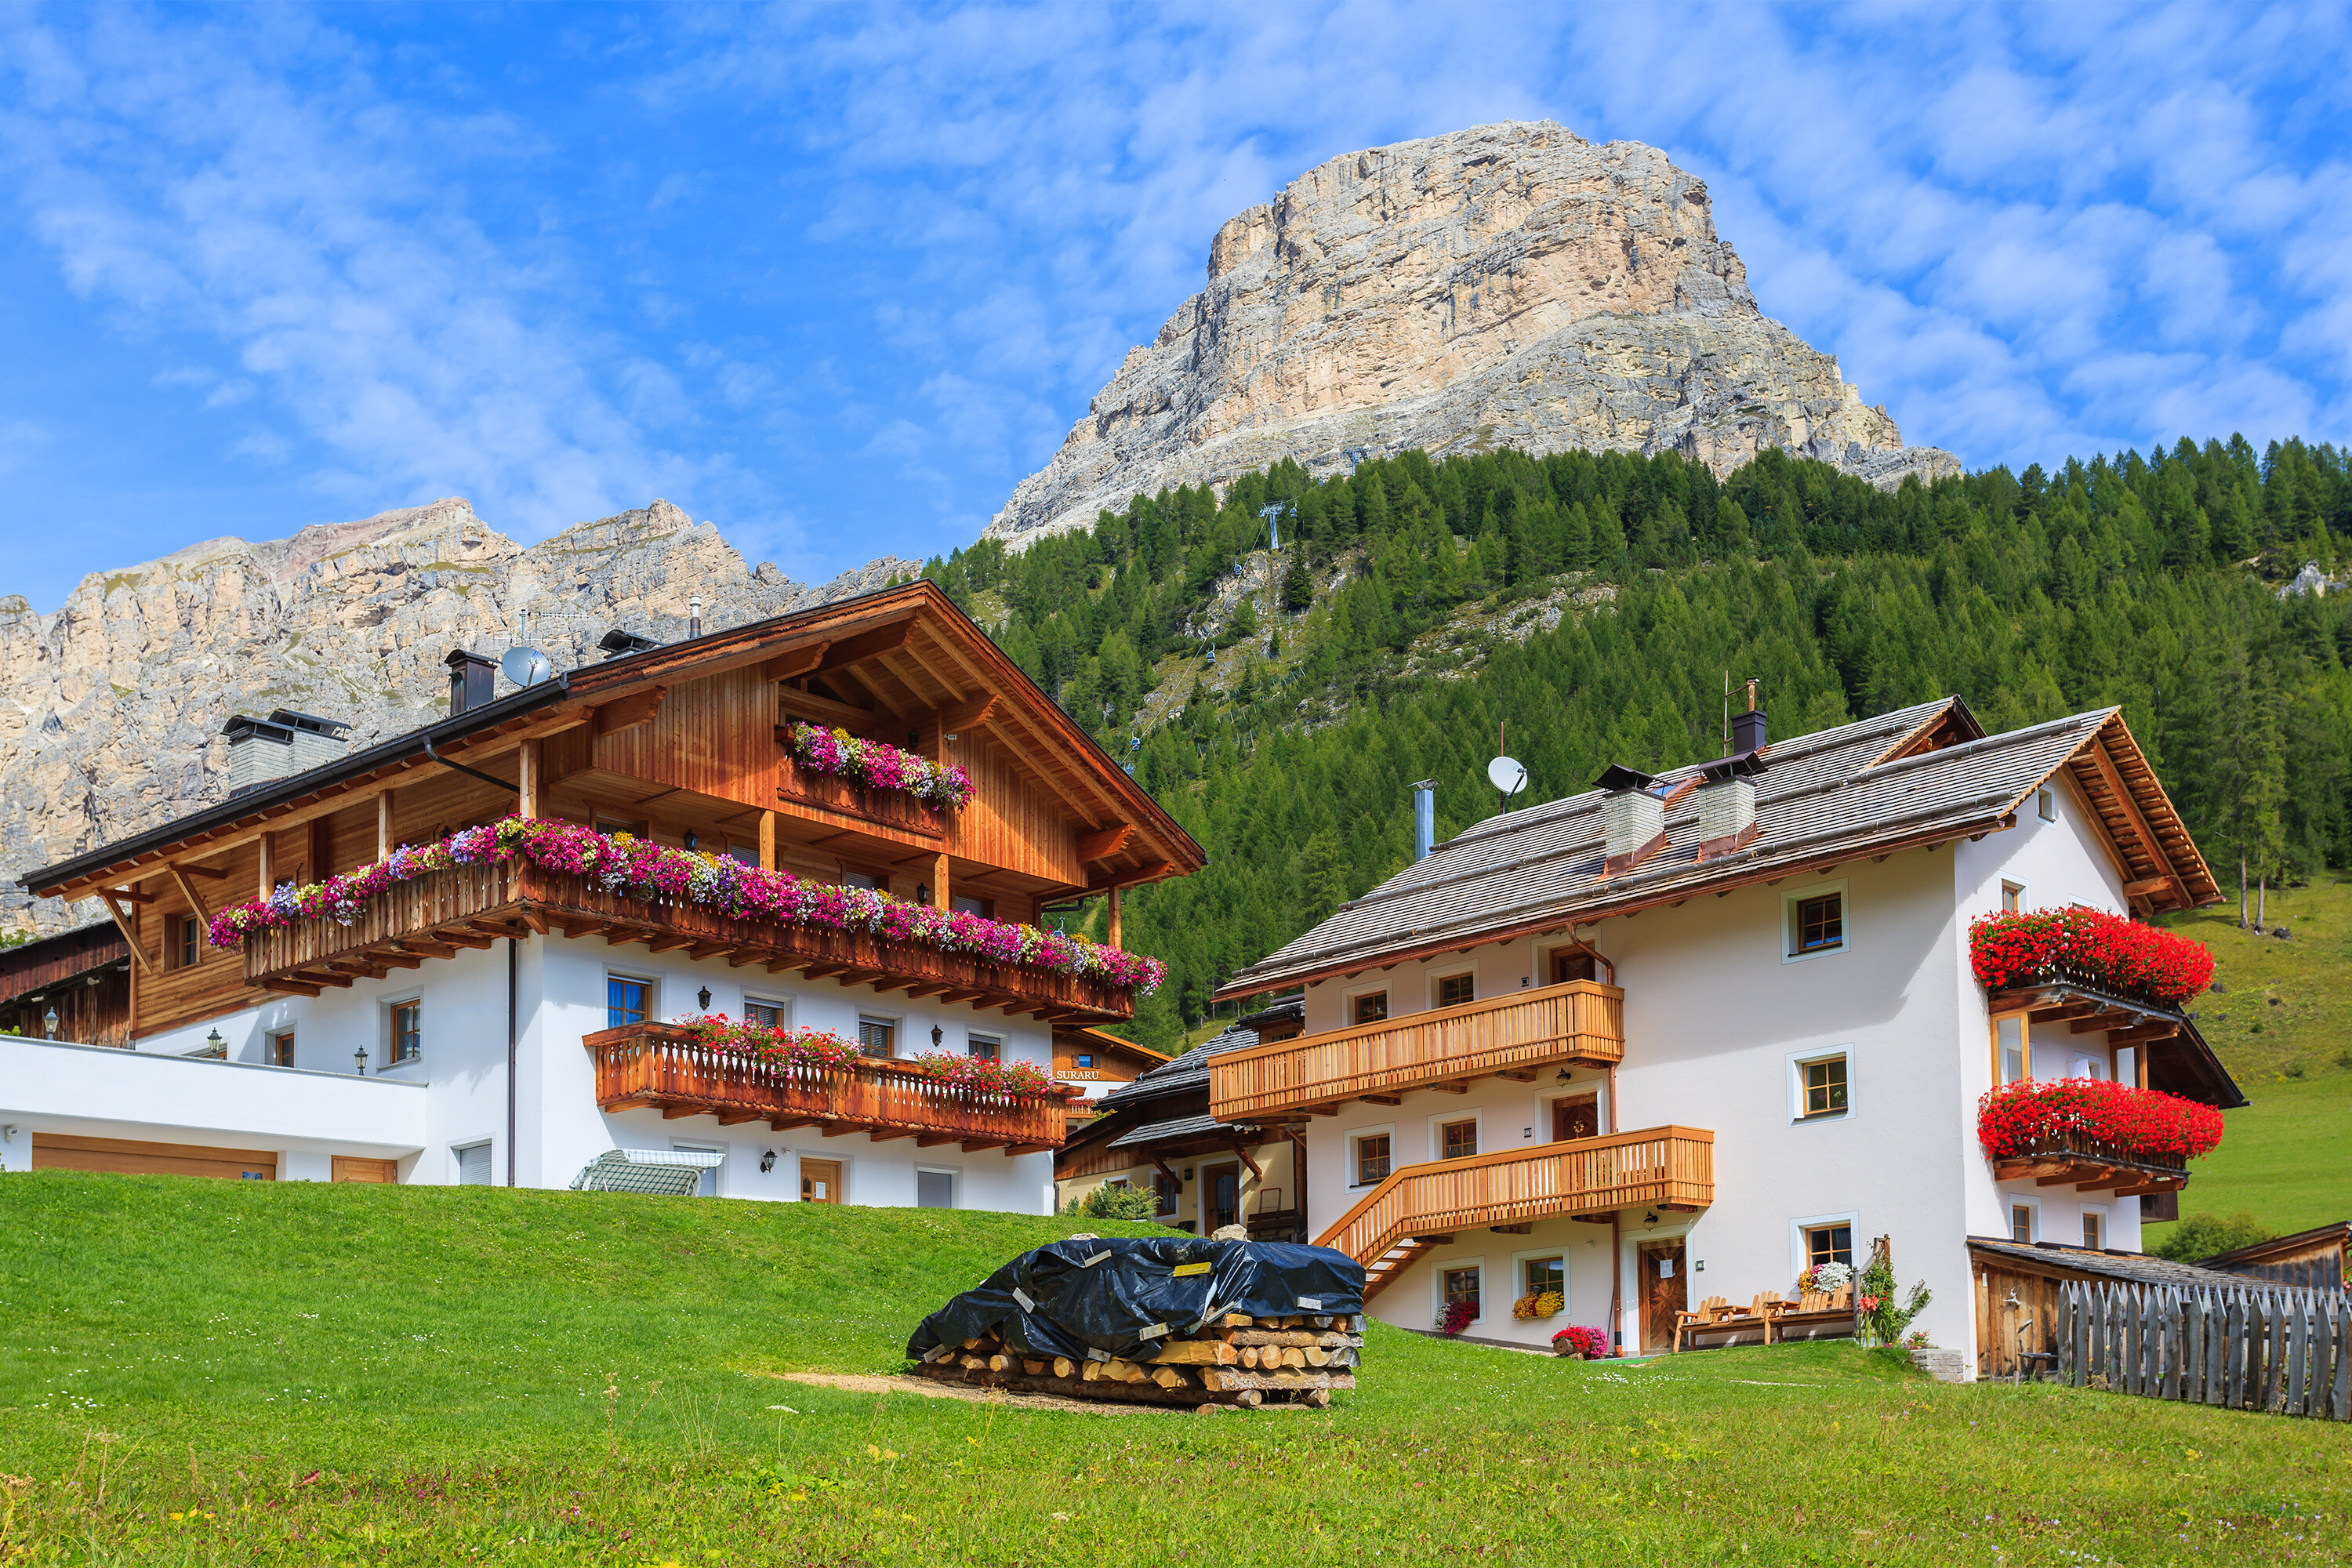 Traditional alpine houses with flowers on balcony in summer landscape of Dolomites Mountains (The Alps), Italy